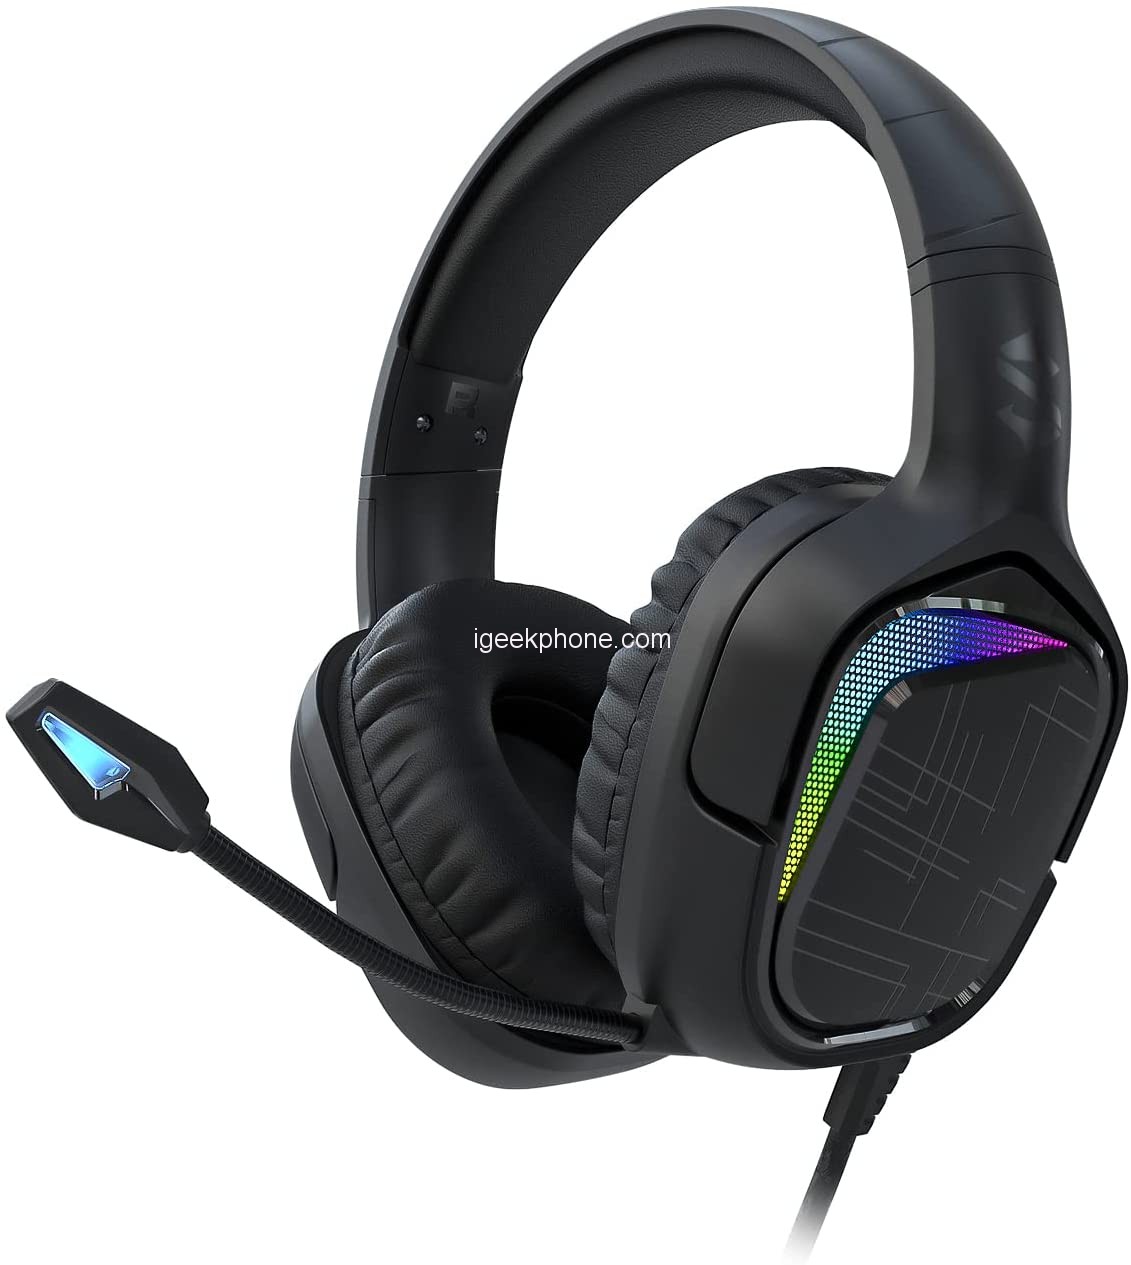 Black Shark T6 Ecouteurs in 30.33€ AND Black Shark X1 Casque in 21.78€ AND Black Shark T1 Ecouteur in 21.78€ @Amazon Sale